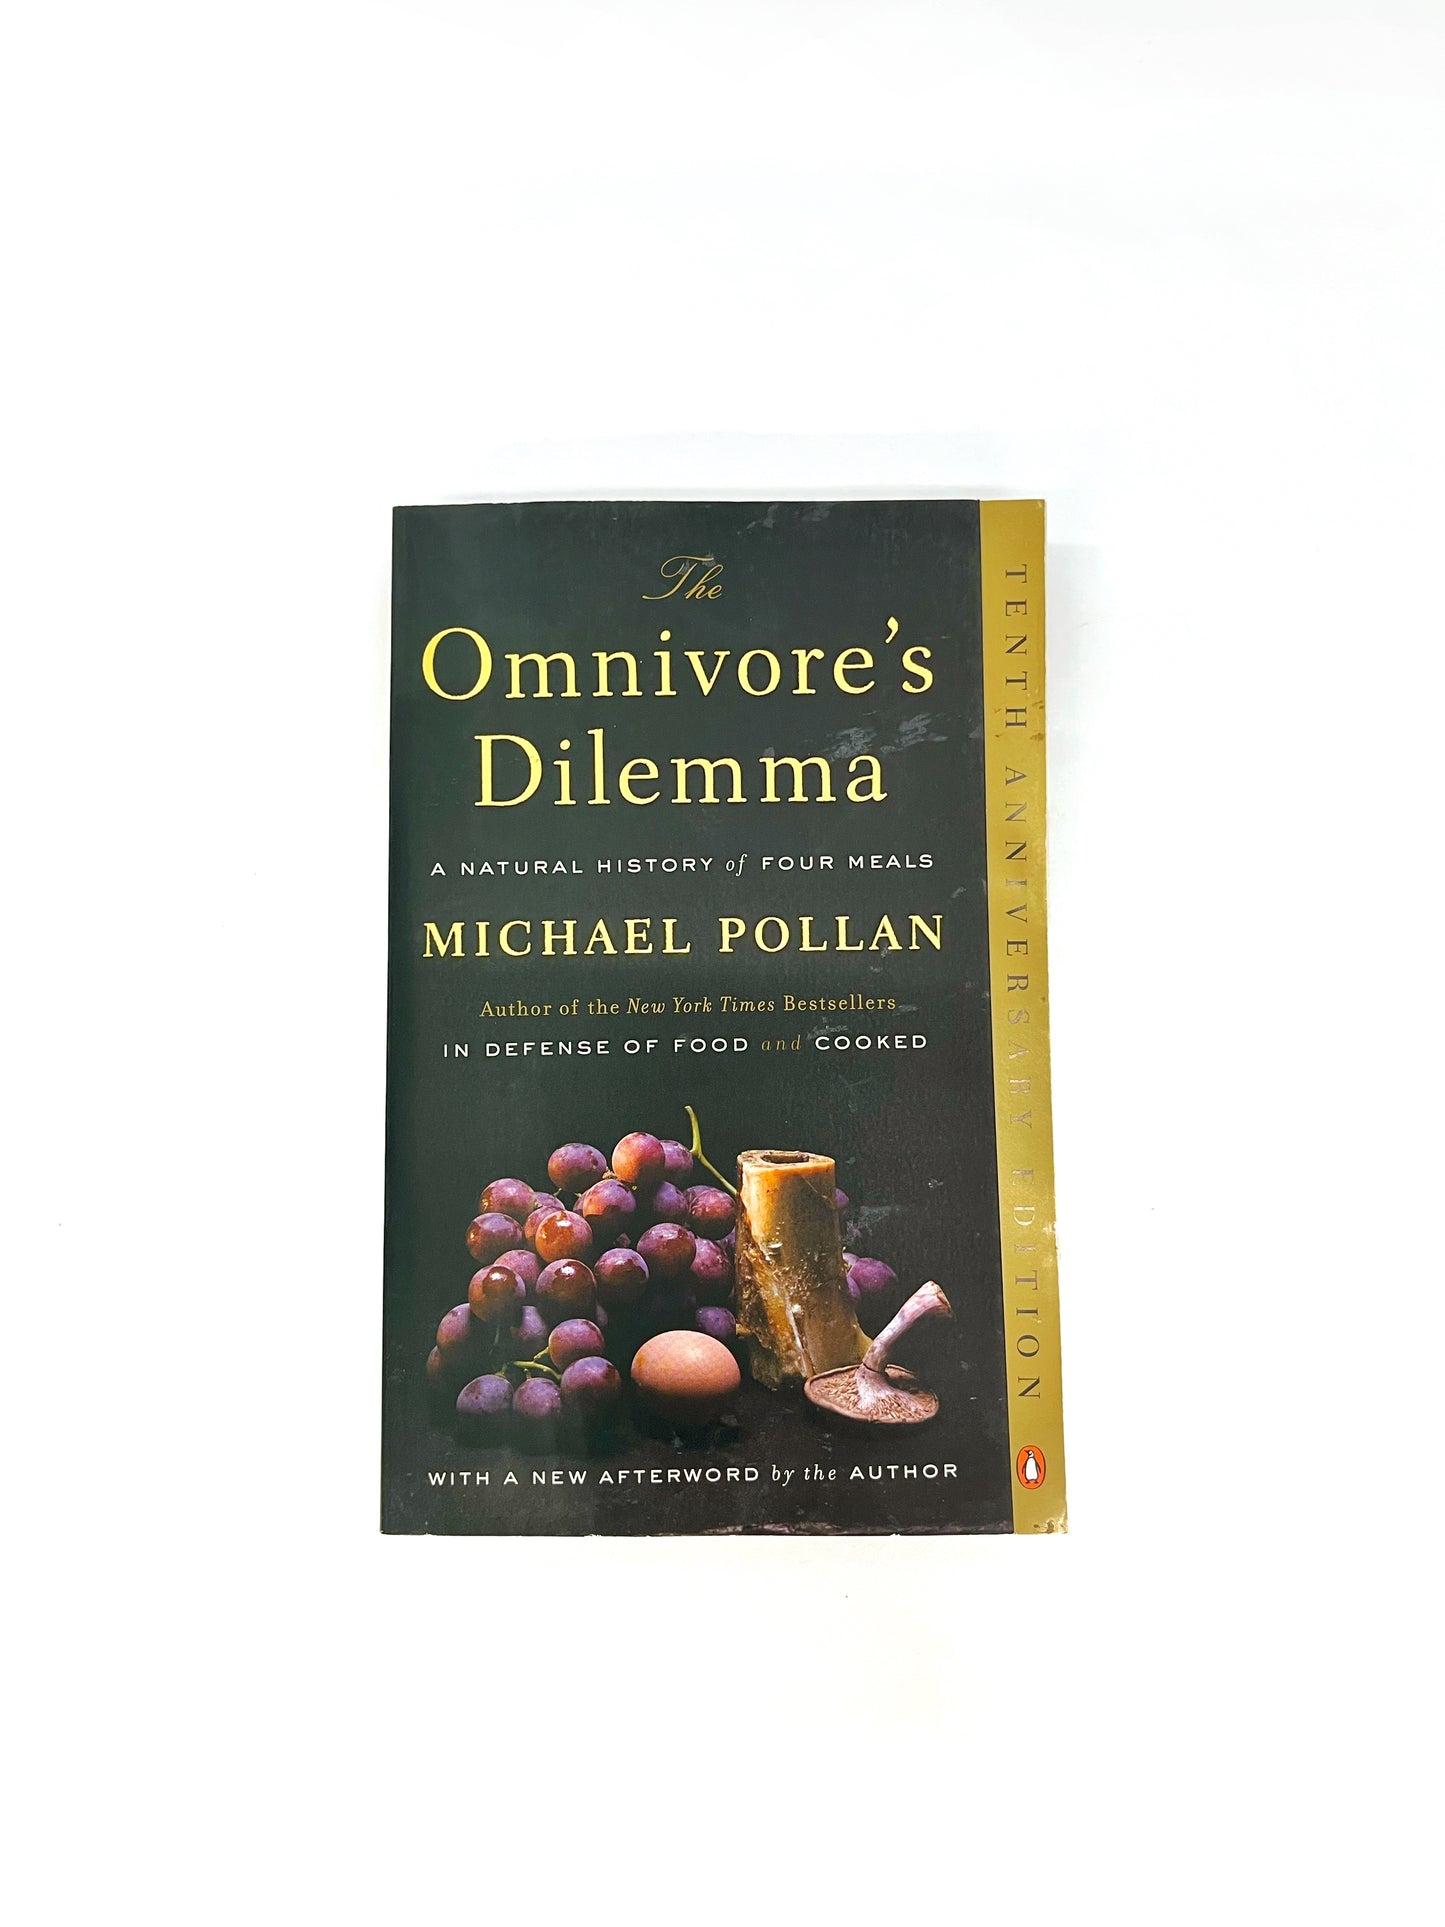 Michael Pollan - The Omnivore's Dilemma: A Natural History of Four Meals